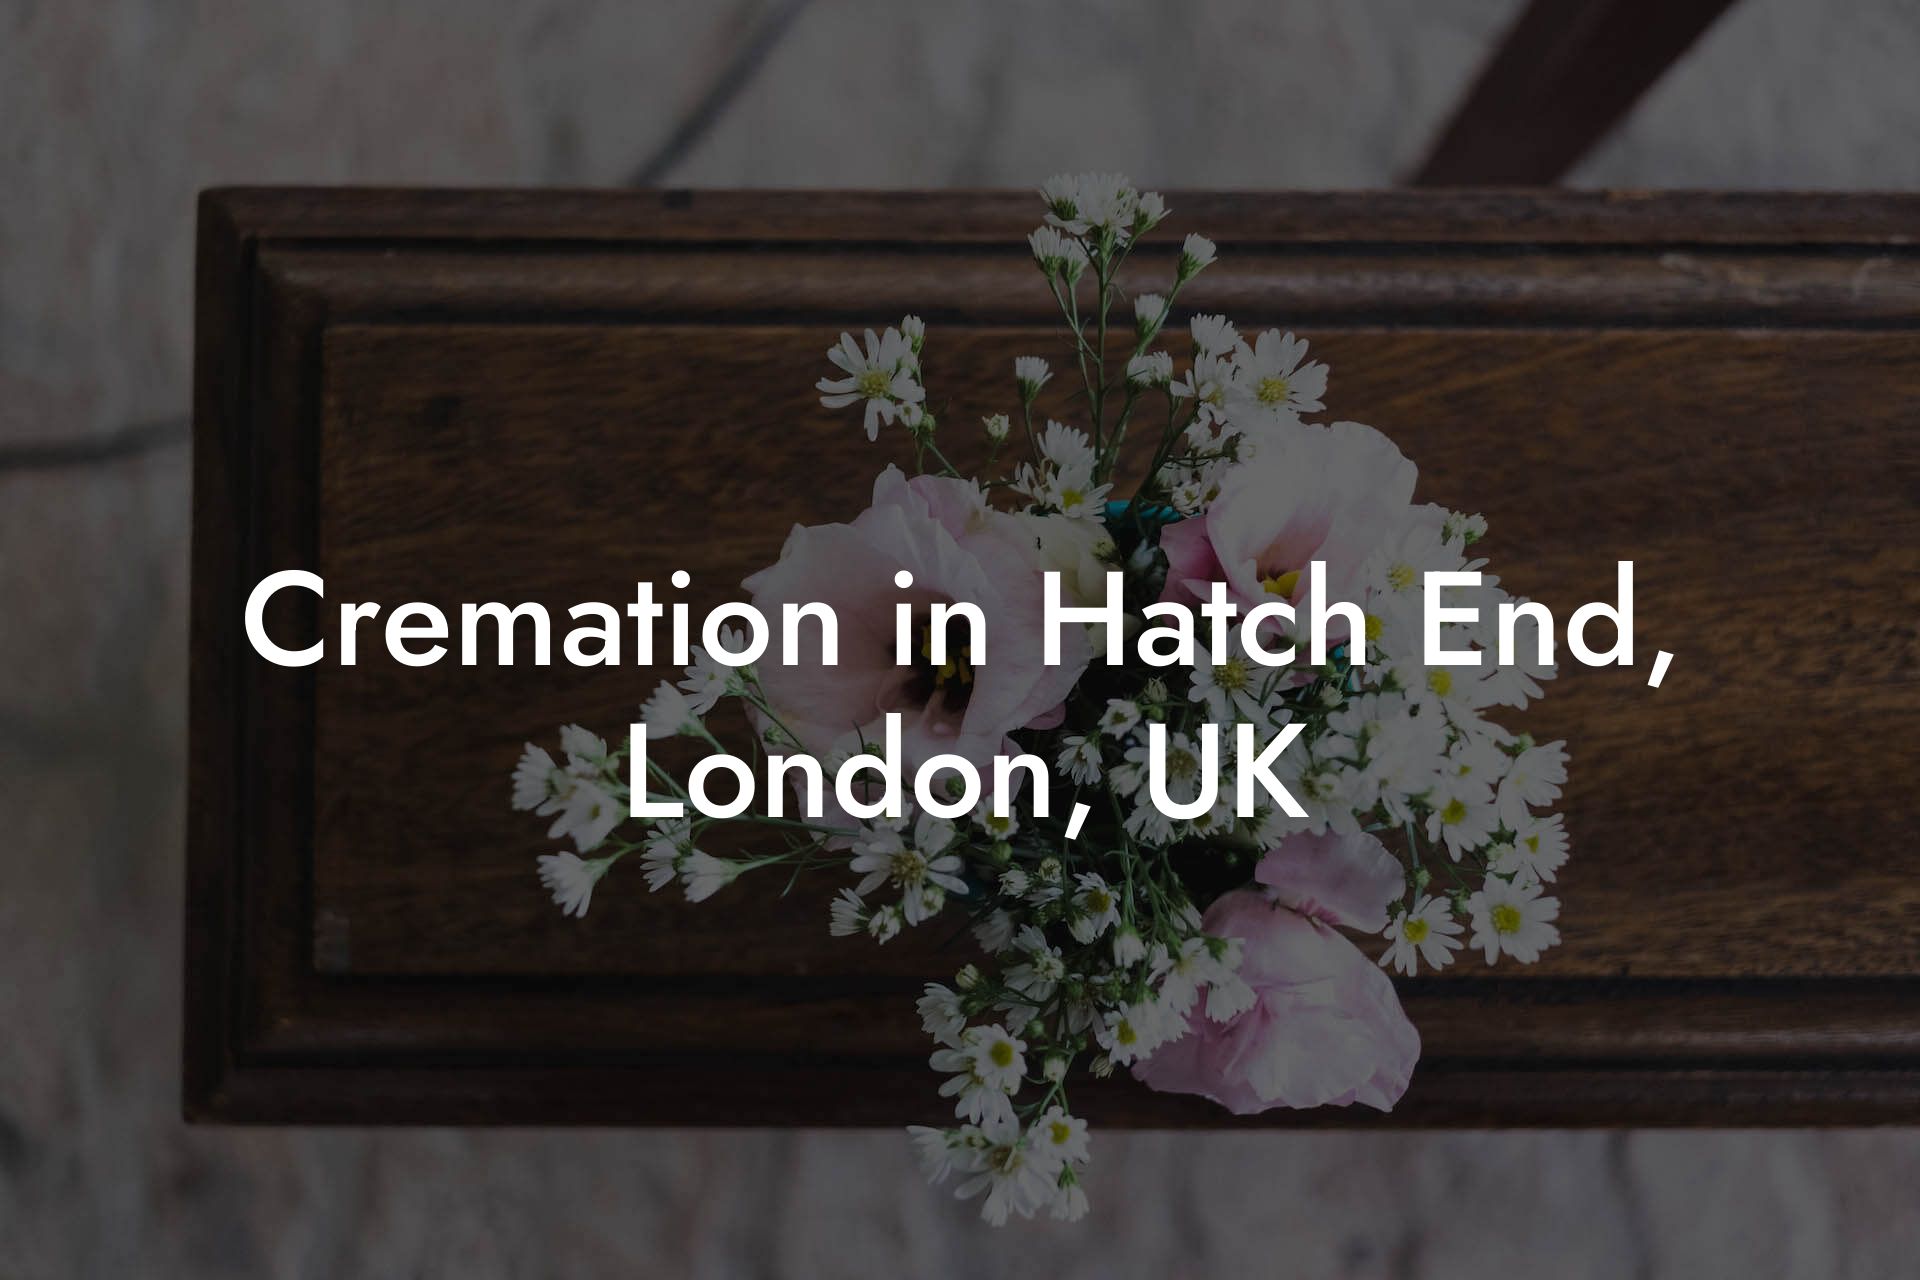 Cremation in Hatch End, London, UK